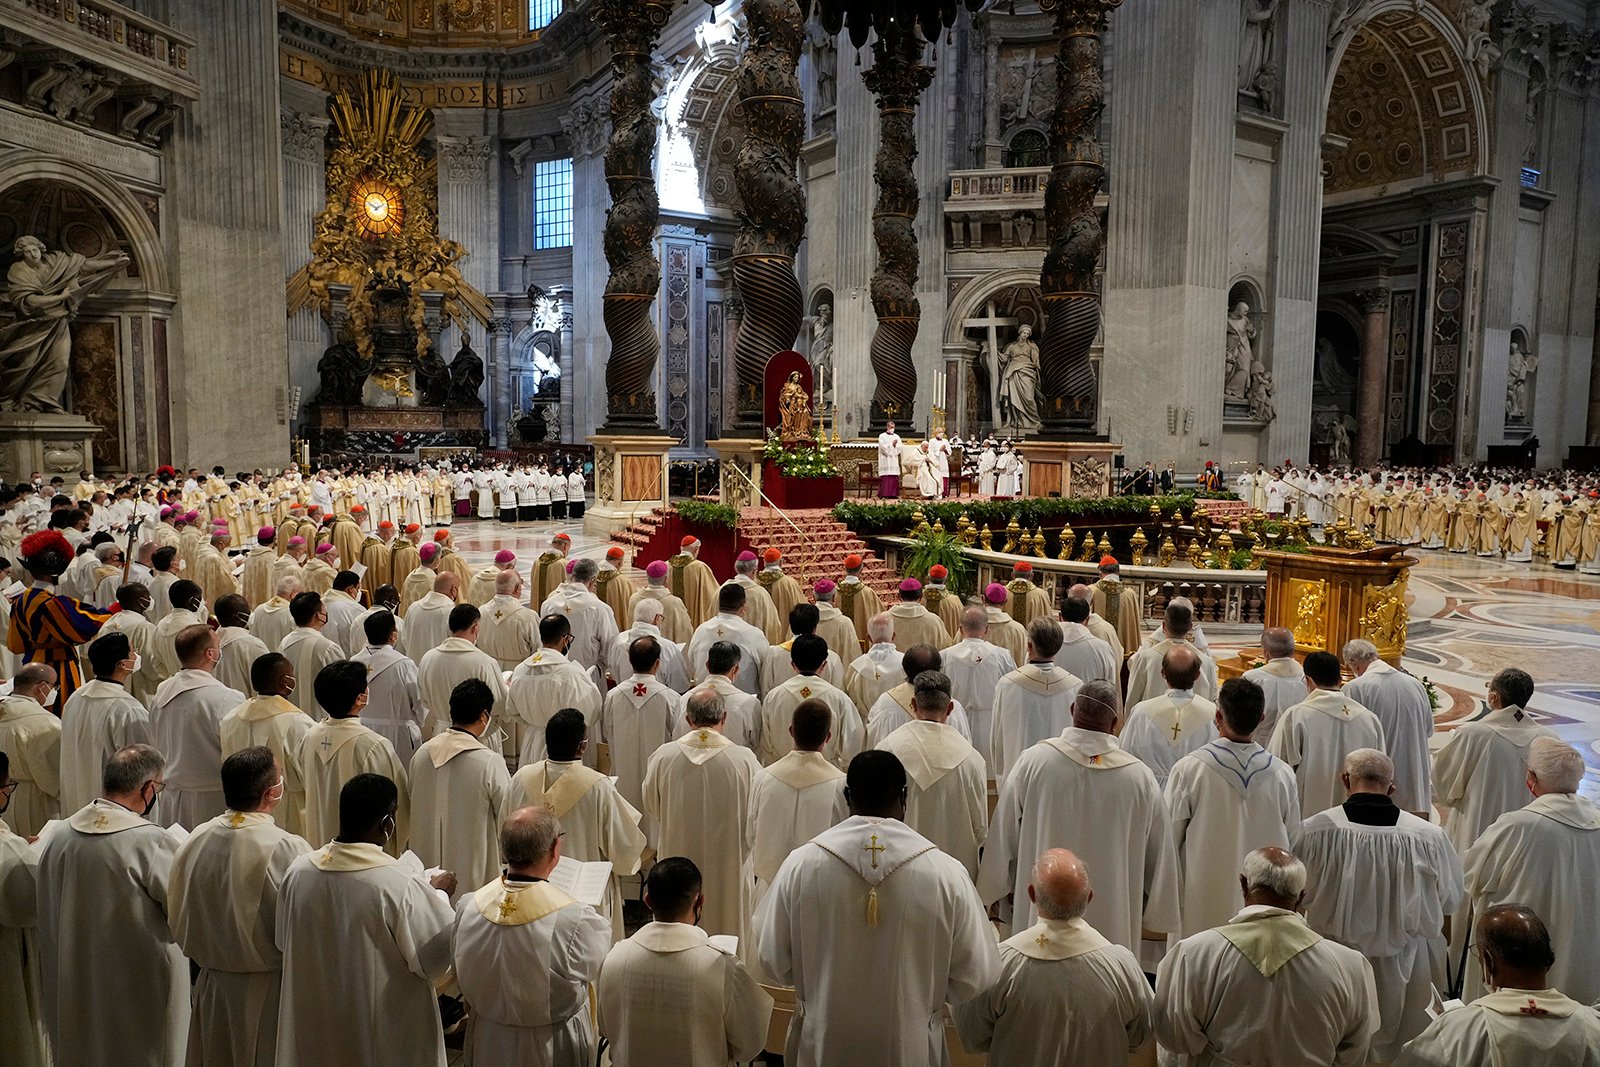 Pope Francis presides over a Chrism Mass inside St. Peter's Basilica, at the Vatican, Thursday, April 14, 2022. During the Mass the Pontiff blesses a token amount of oil that will be used to administer the sacraments for the year. (AP Photo/Gregorio Borgia)